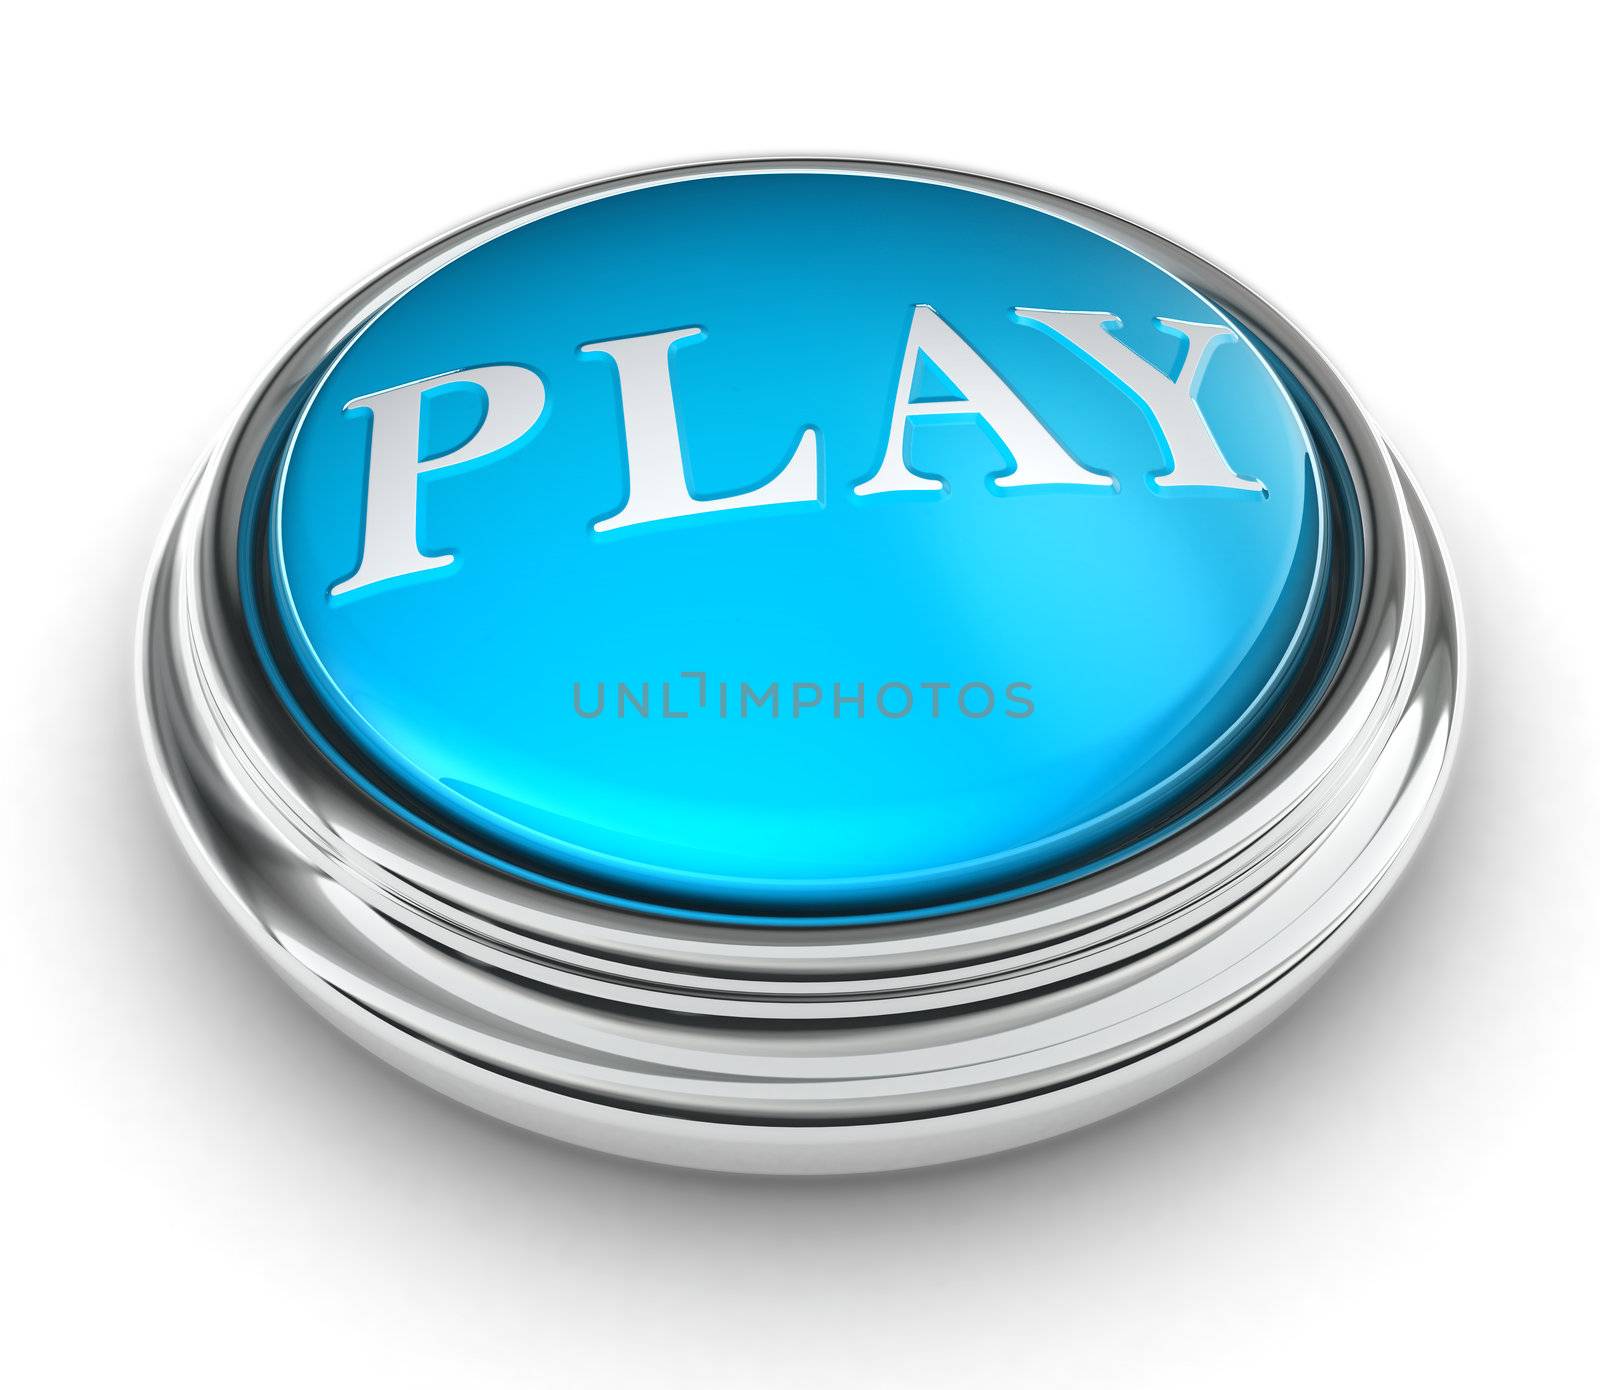 play word on blue button on white background. clipping path included